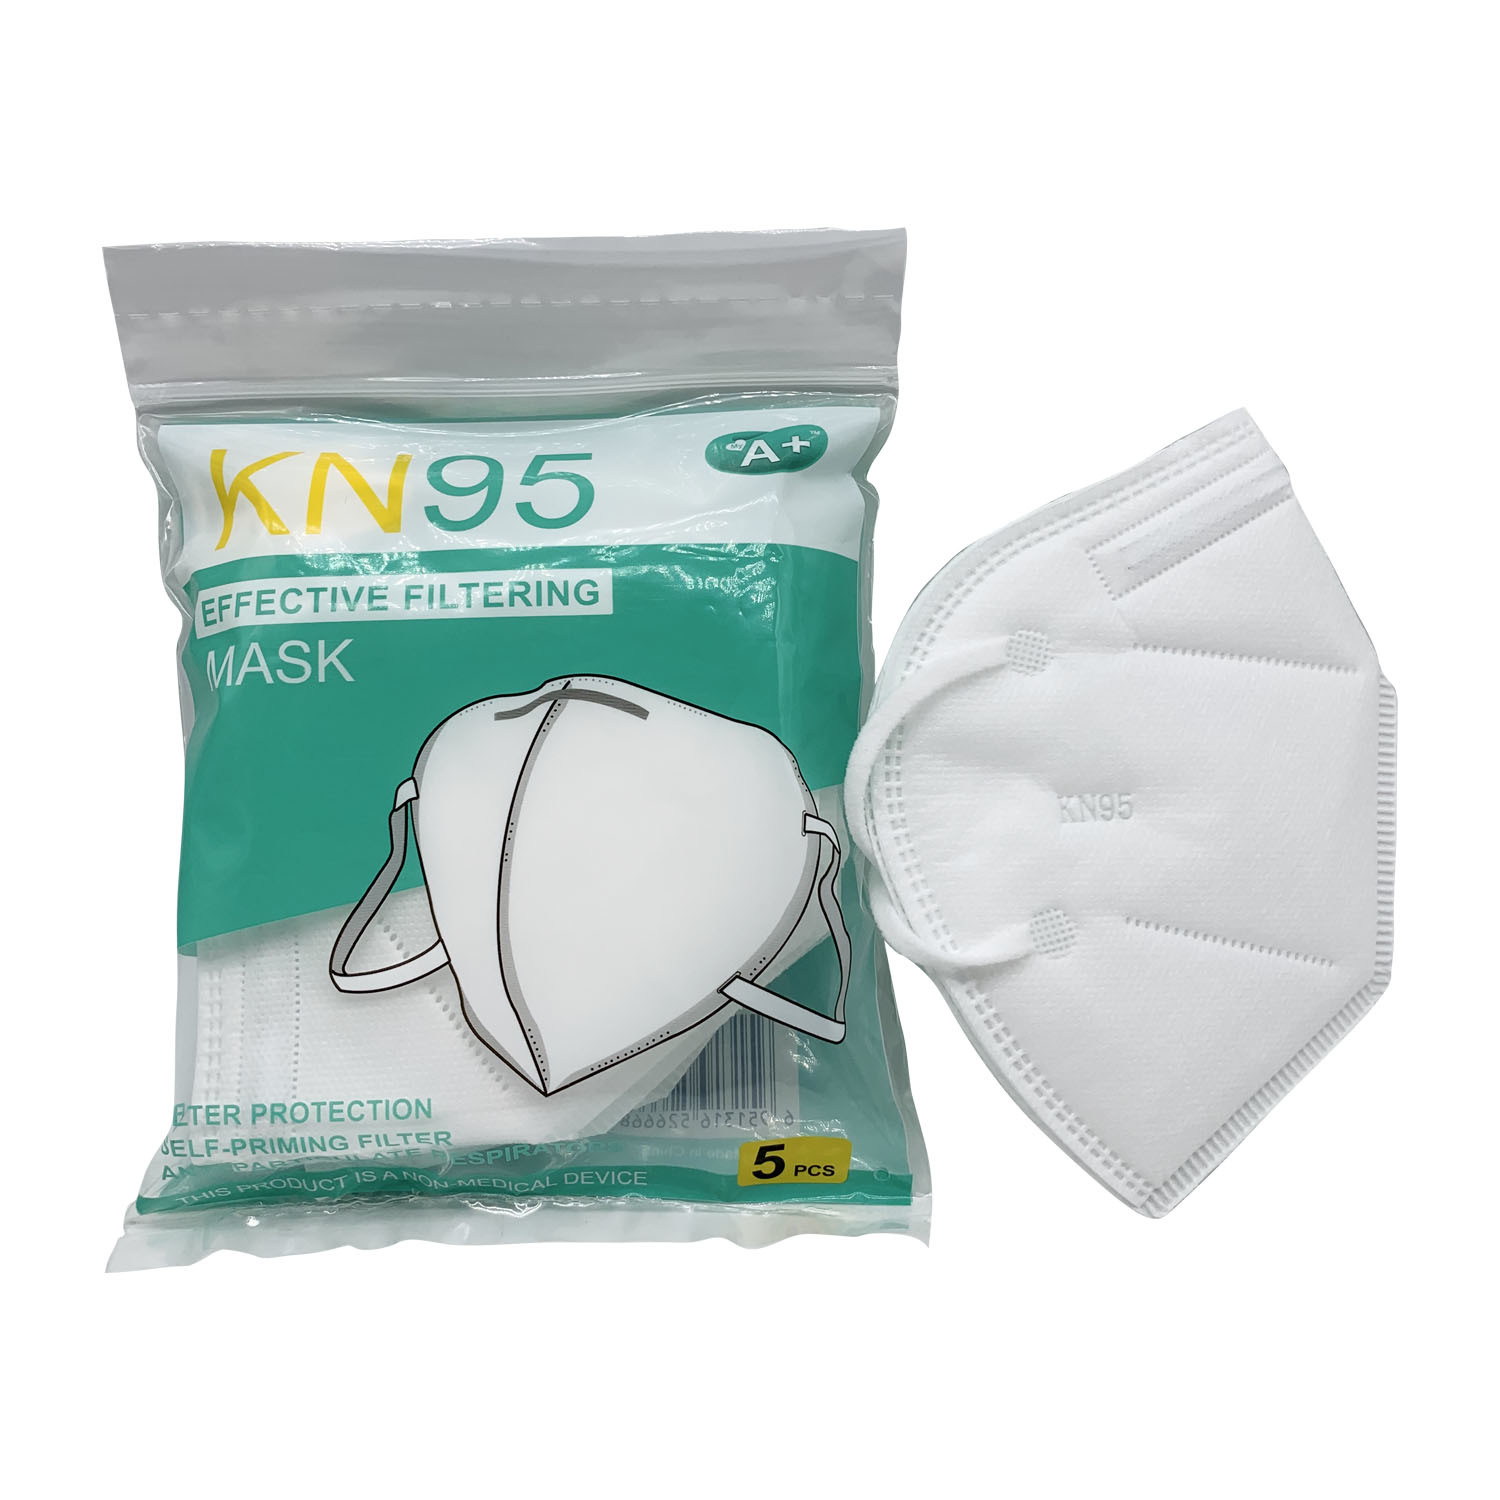 KN95 Mask 5 Ply